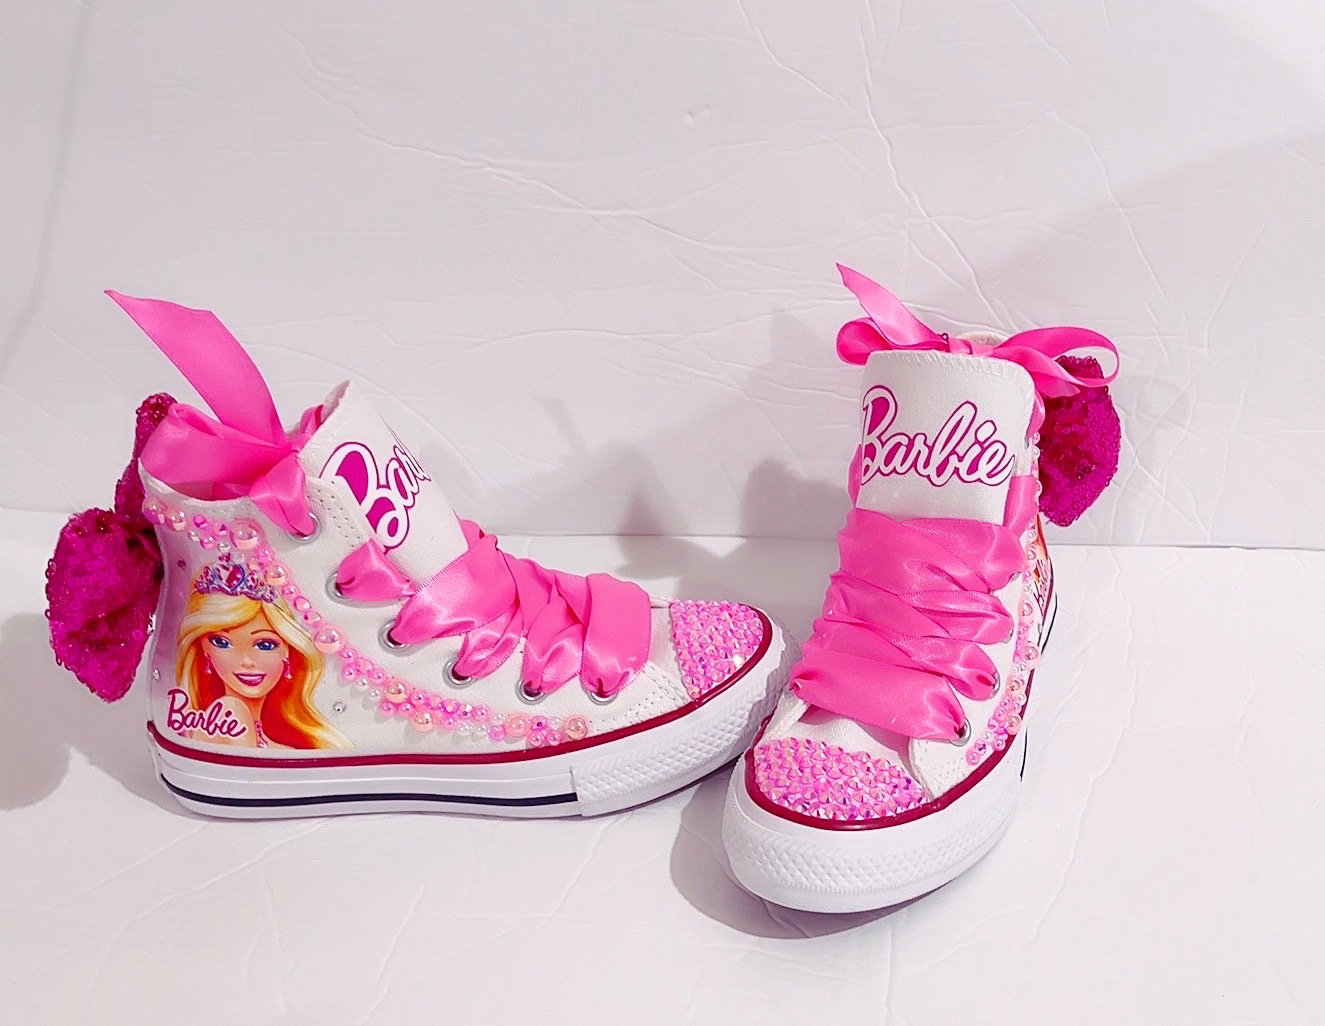 Custom Doll Barbie Shoes Converse Sneakers Girls Shoes - Etsy